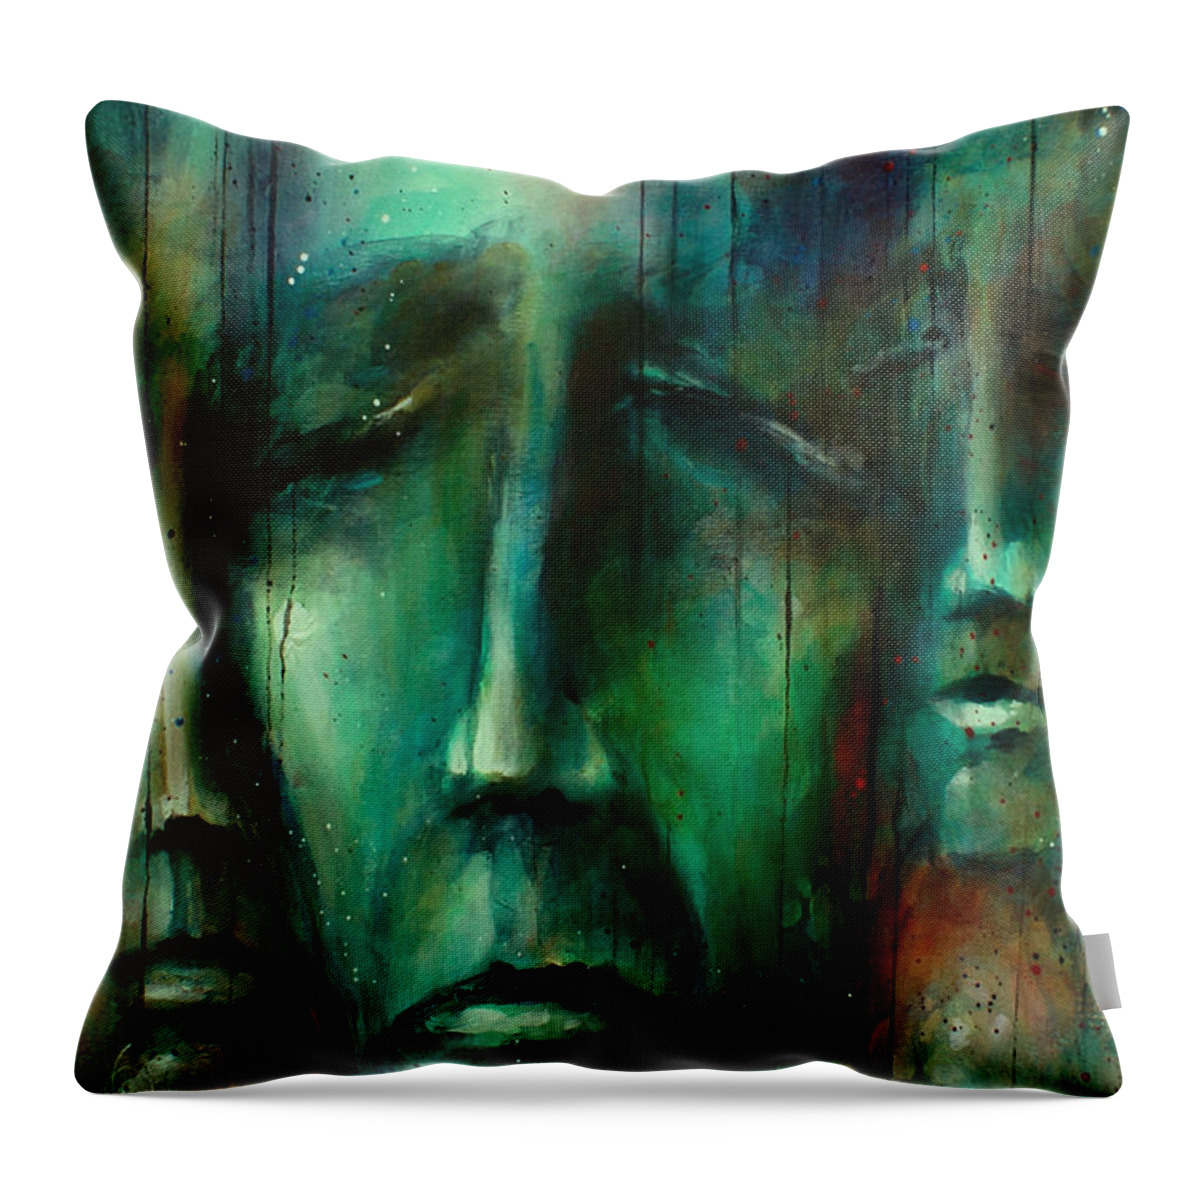 Figurative Throw Pillow featuring the painting ' Heros ' by Michael Lang